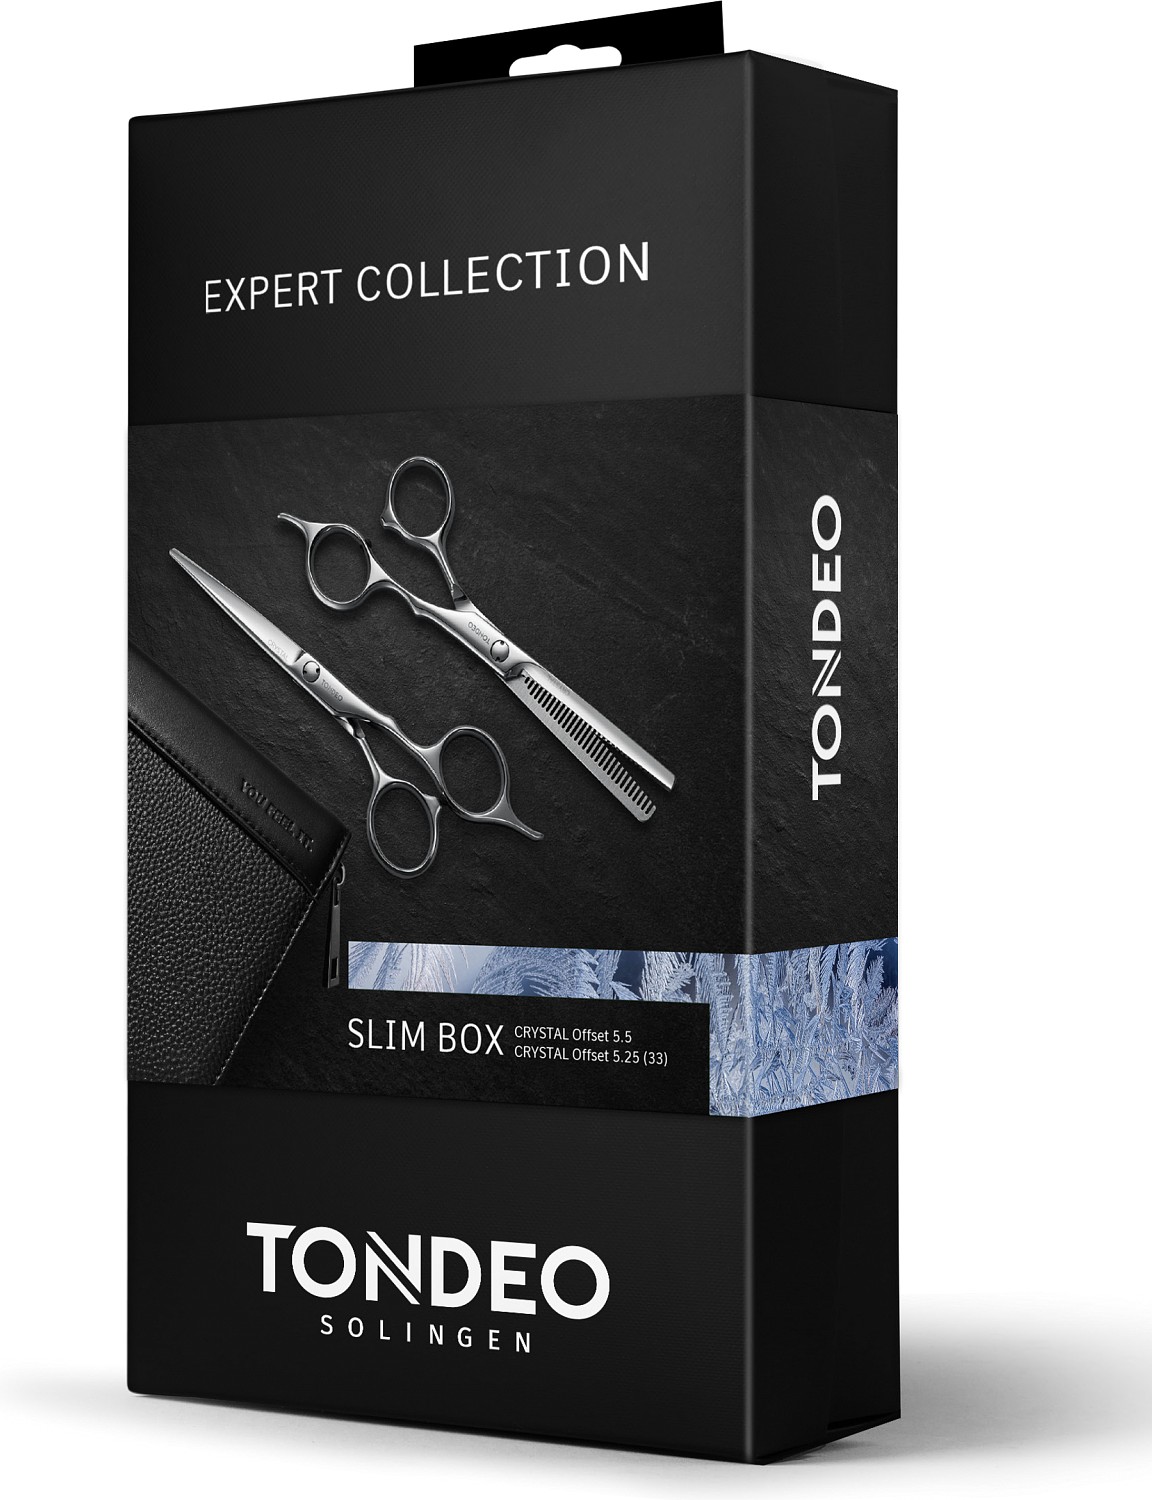  Tondeo Expert Collection Box Slim Offset 5.5 